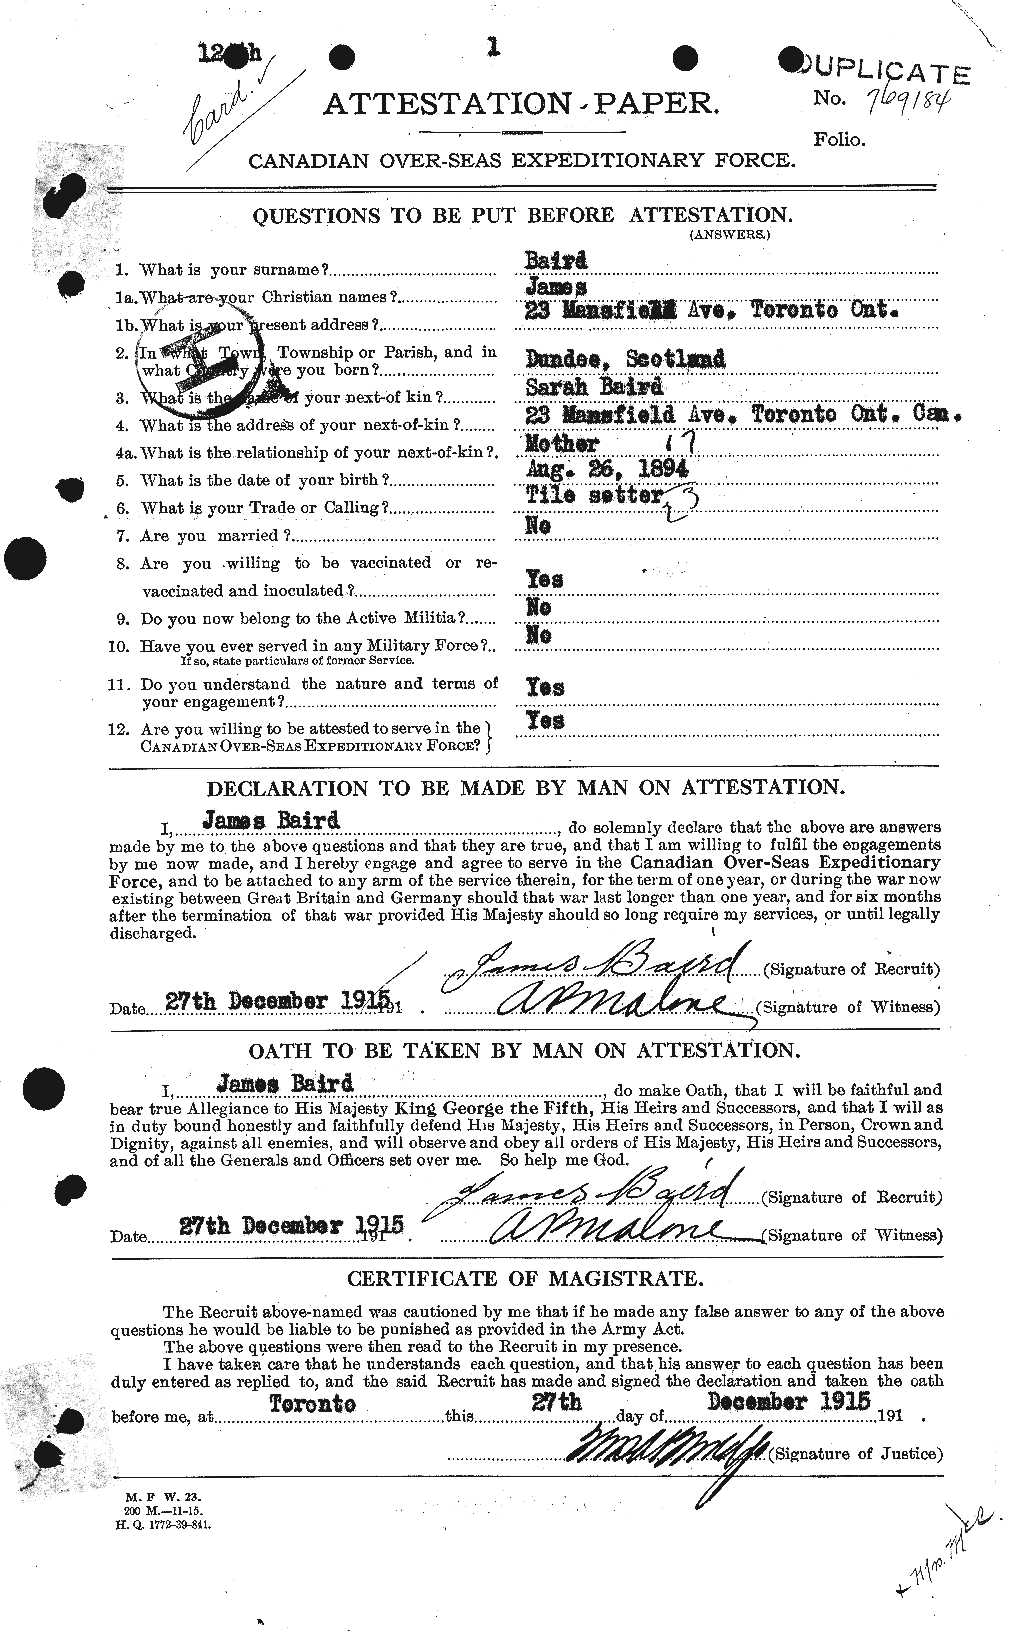 Personnel Records of the First World War - CEF 226647a